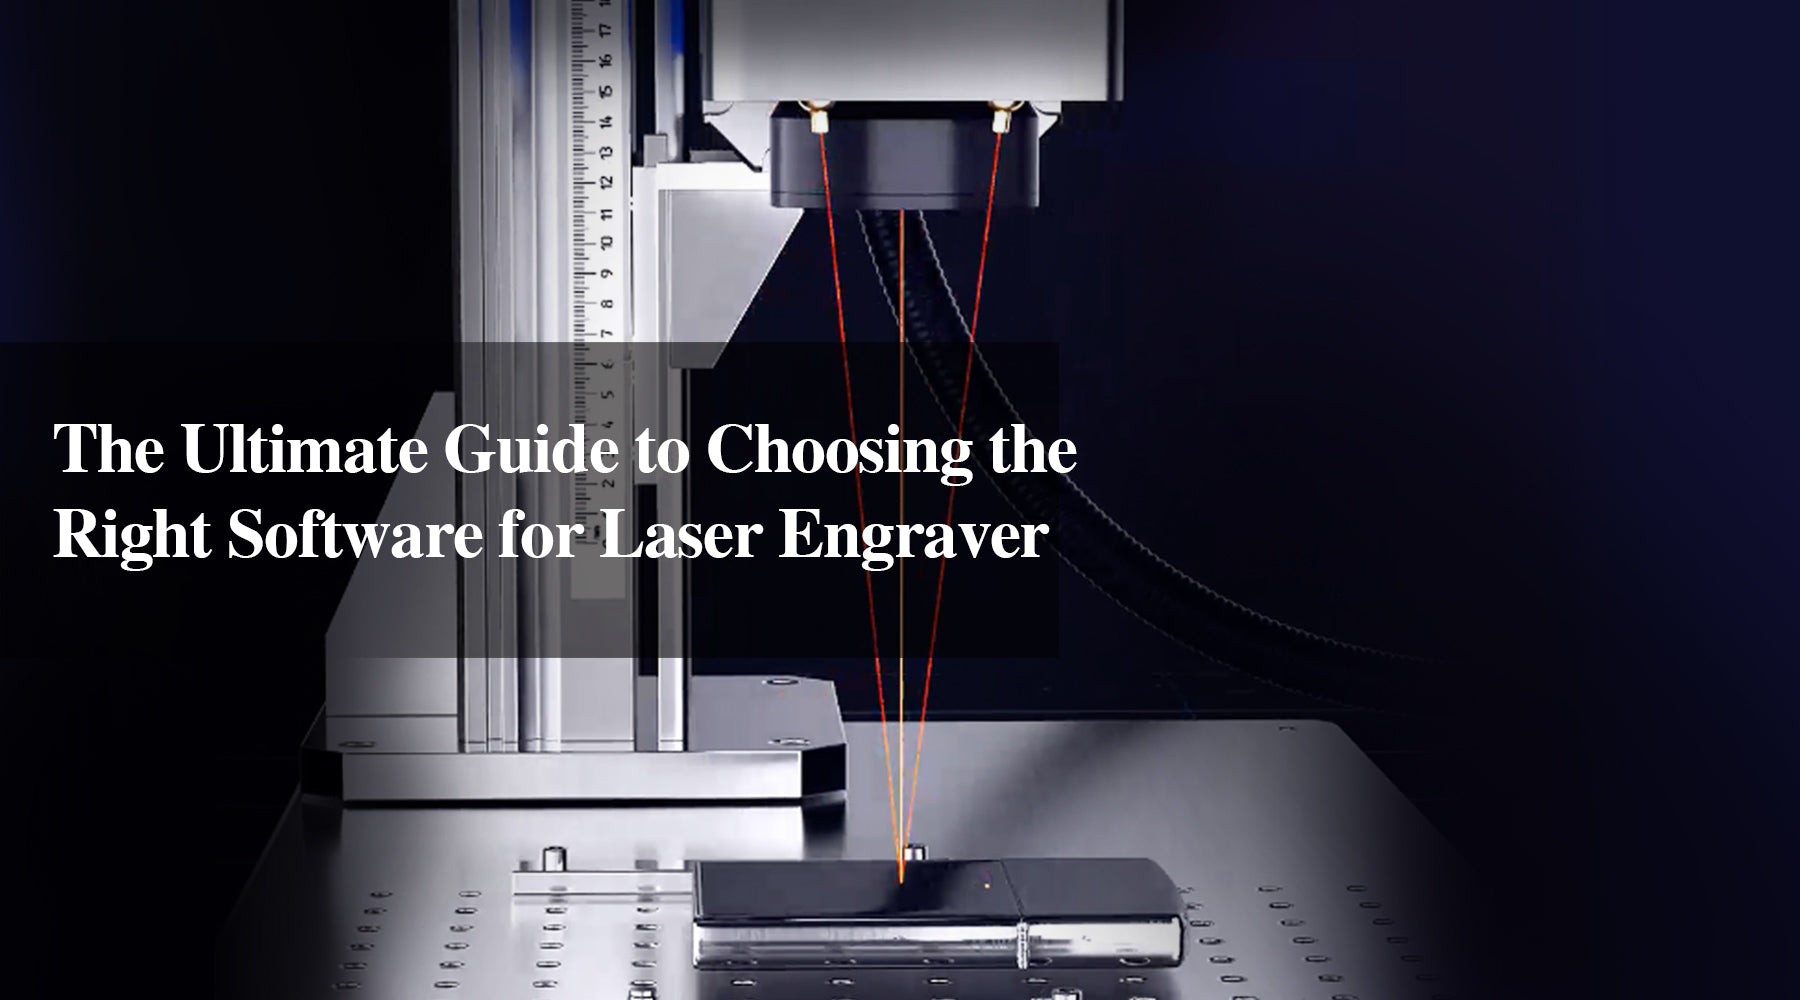 The Ultimate Guide to Choosing the Right Software for Laser Engraver